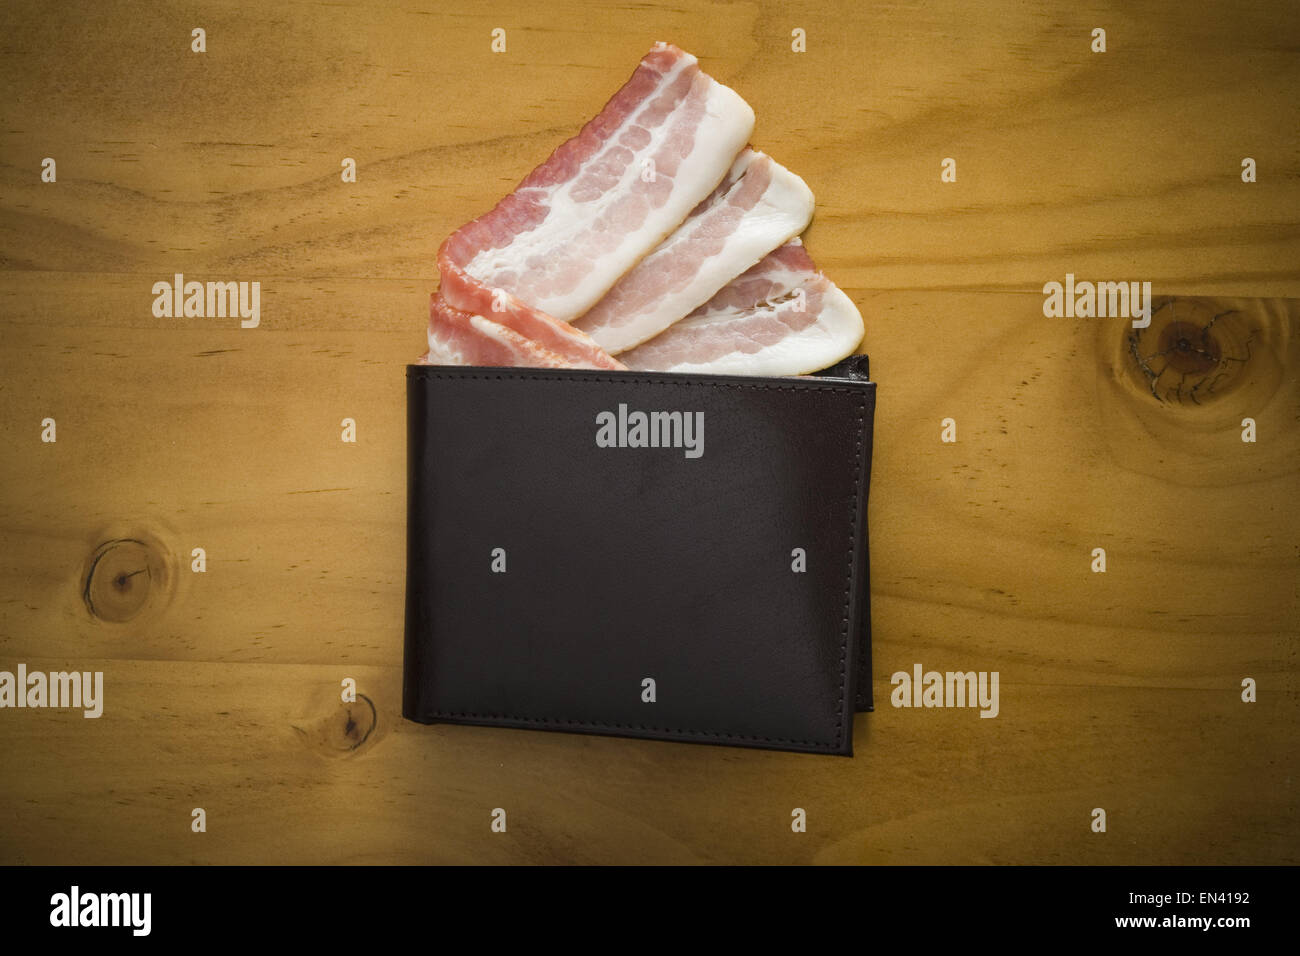 Billfold with strips of bacon Stock Photo